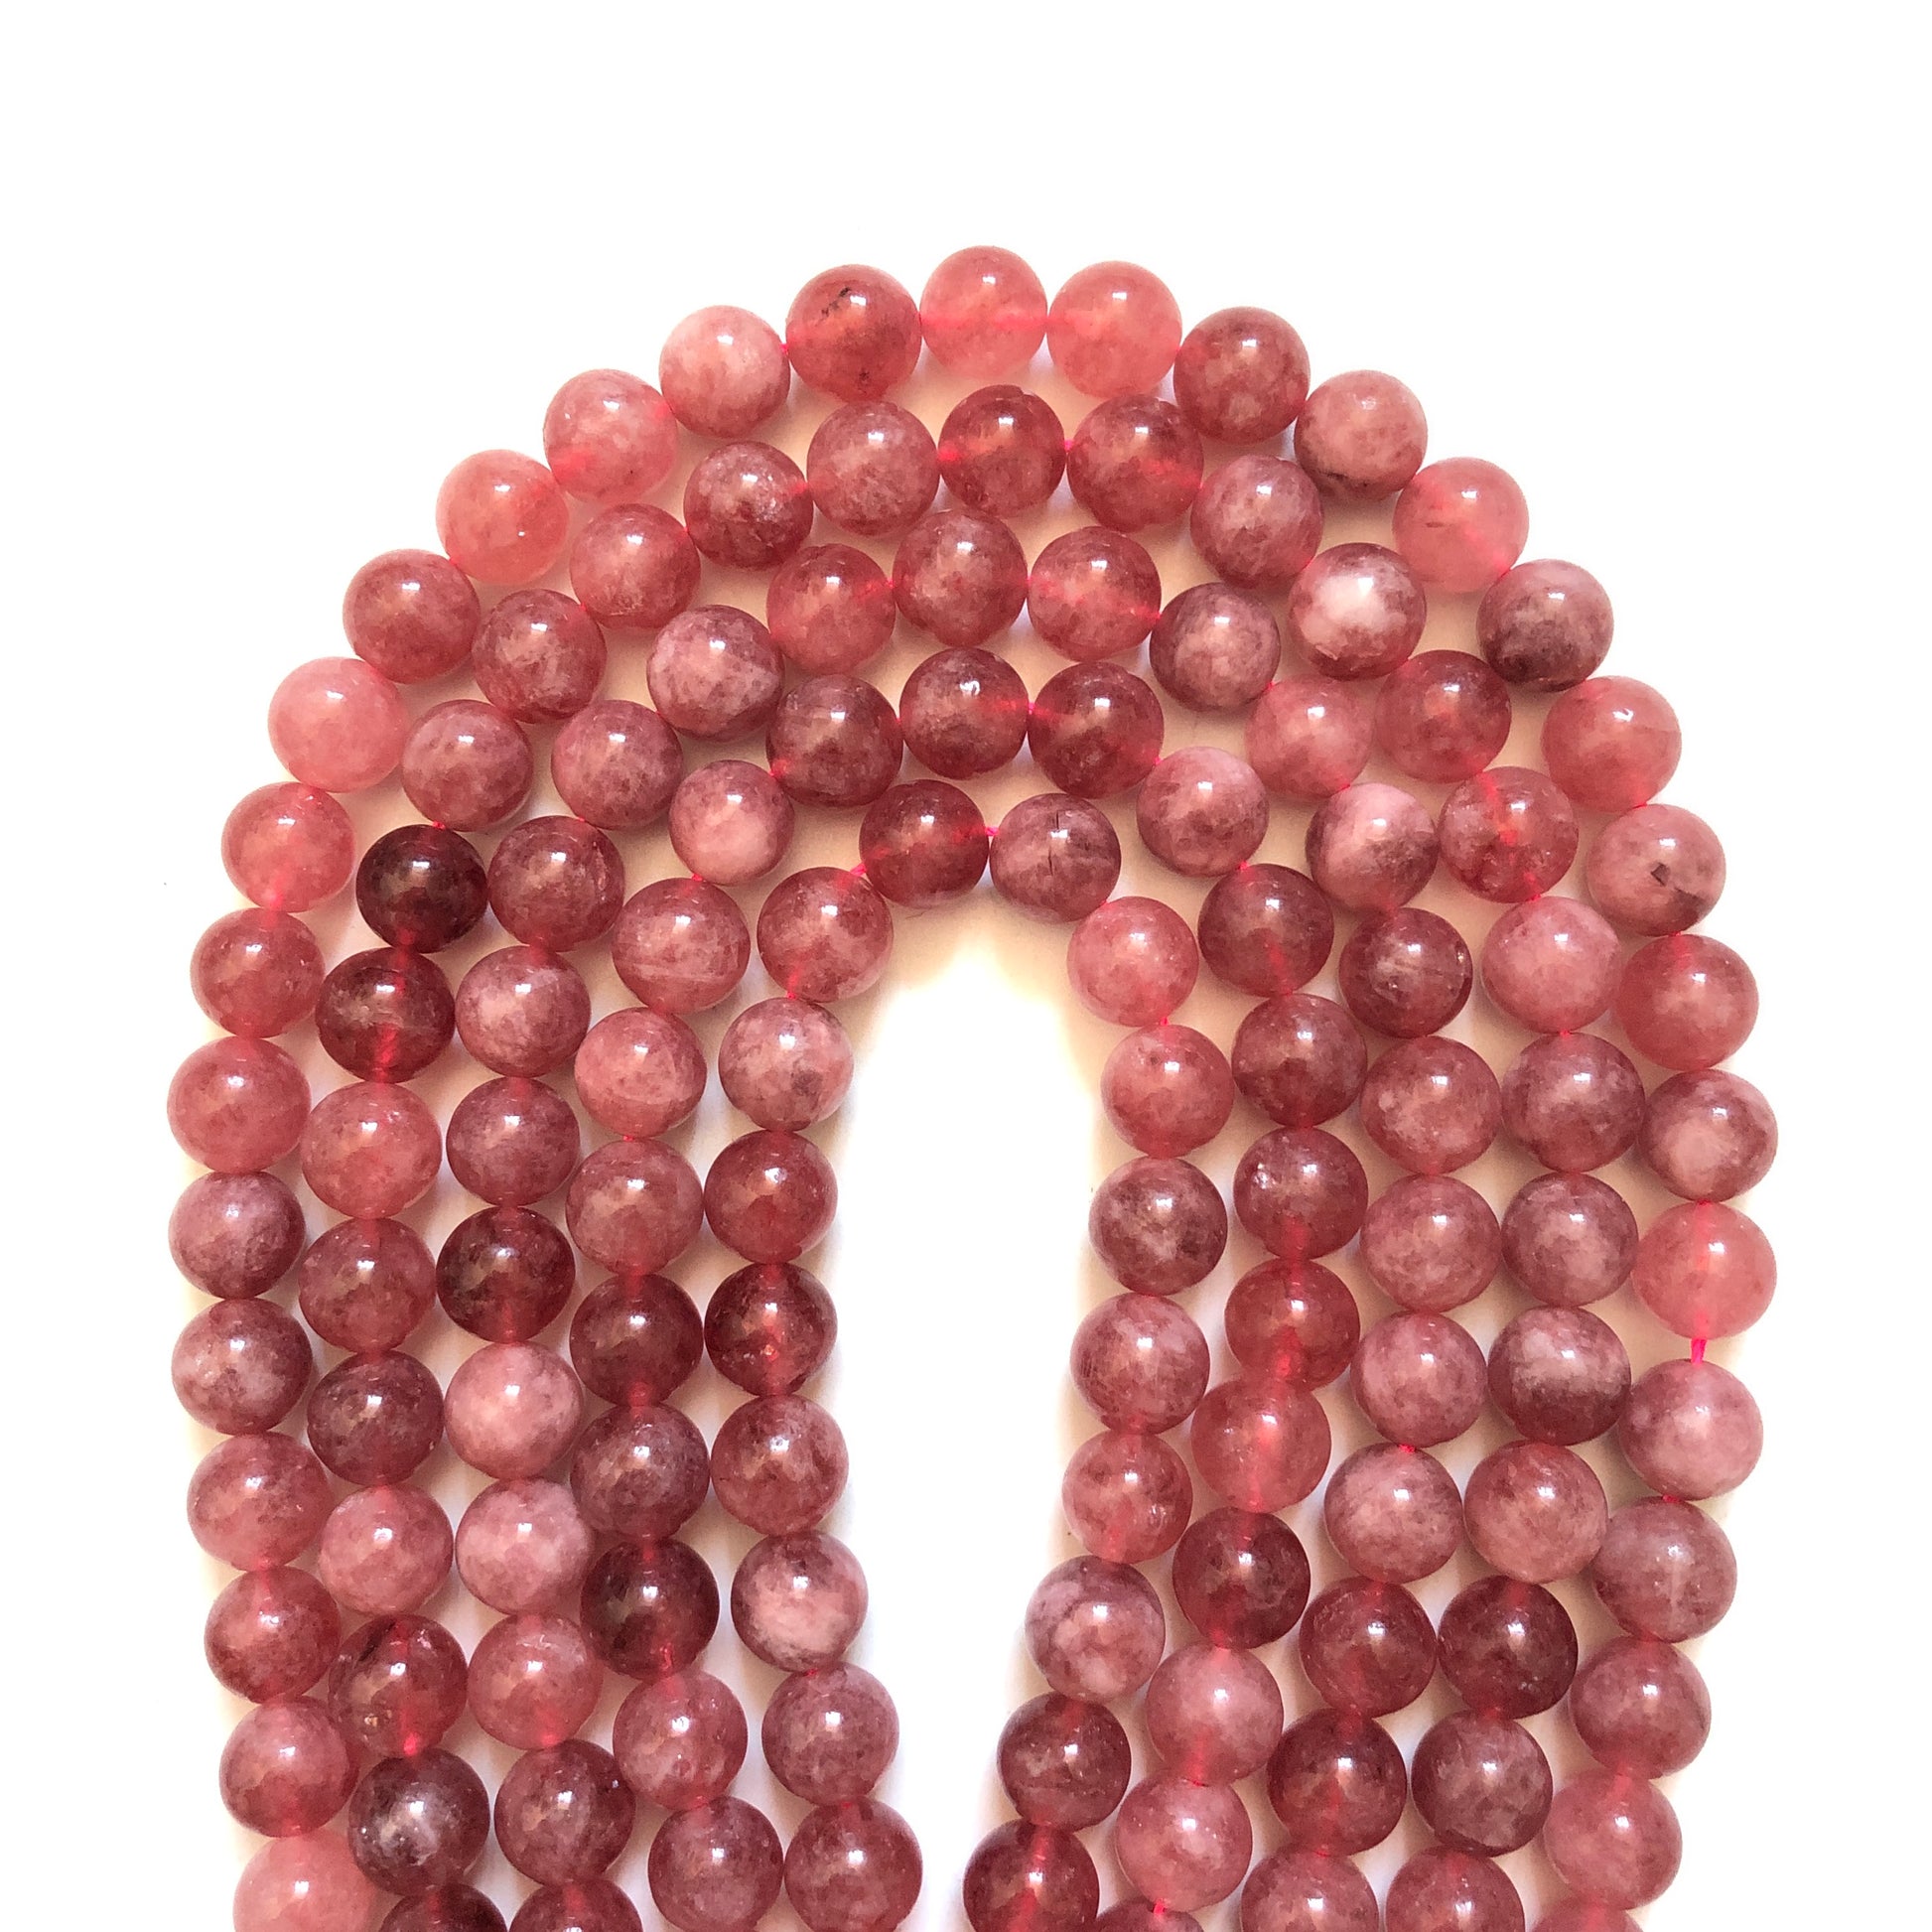 2 Strands/lot 10mm Multicolor Quartz Round Stone Beads Strawberry Quartz Stone Beads New Beads Arrivals Other Stone Beads Charms Beads Beyond